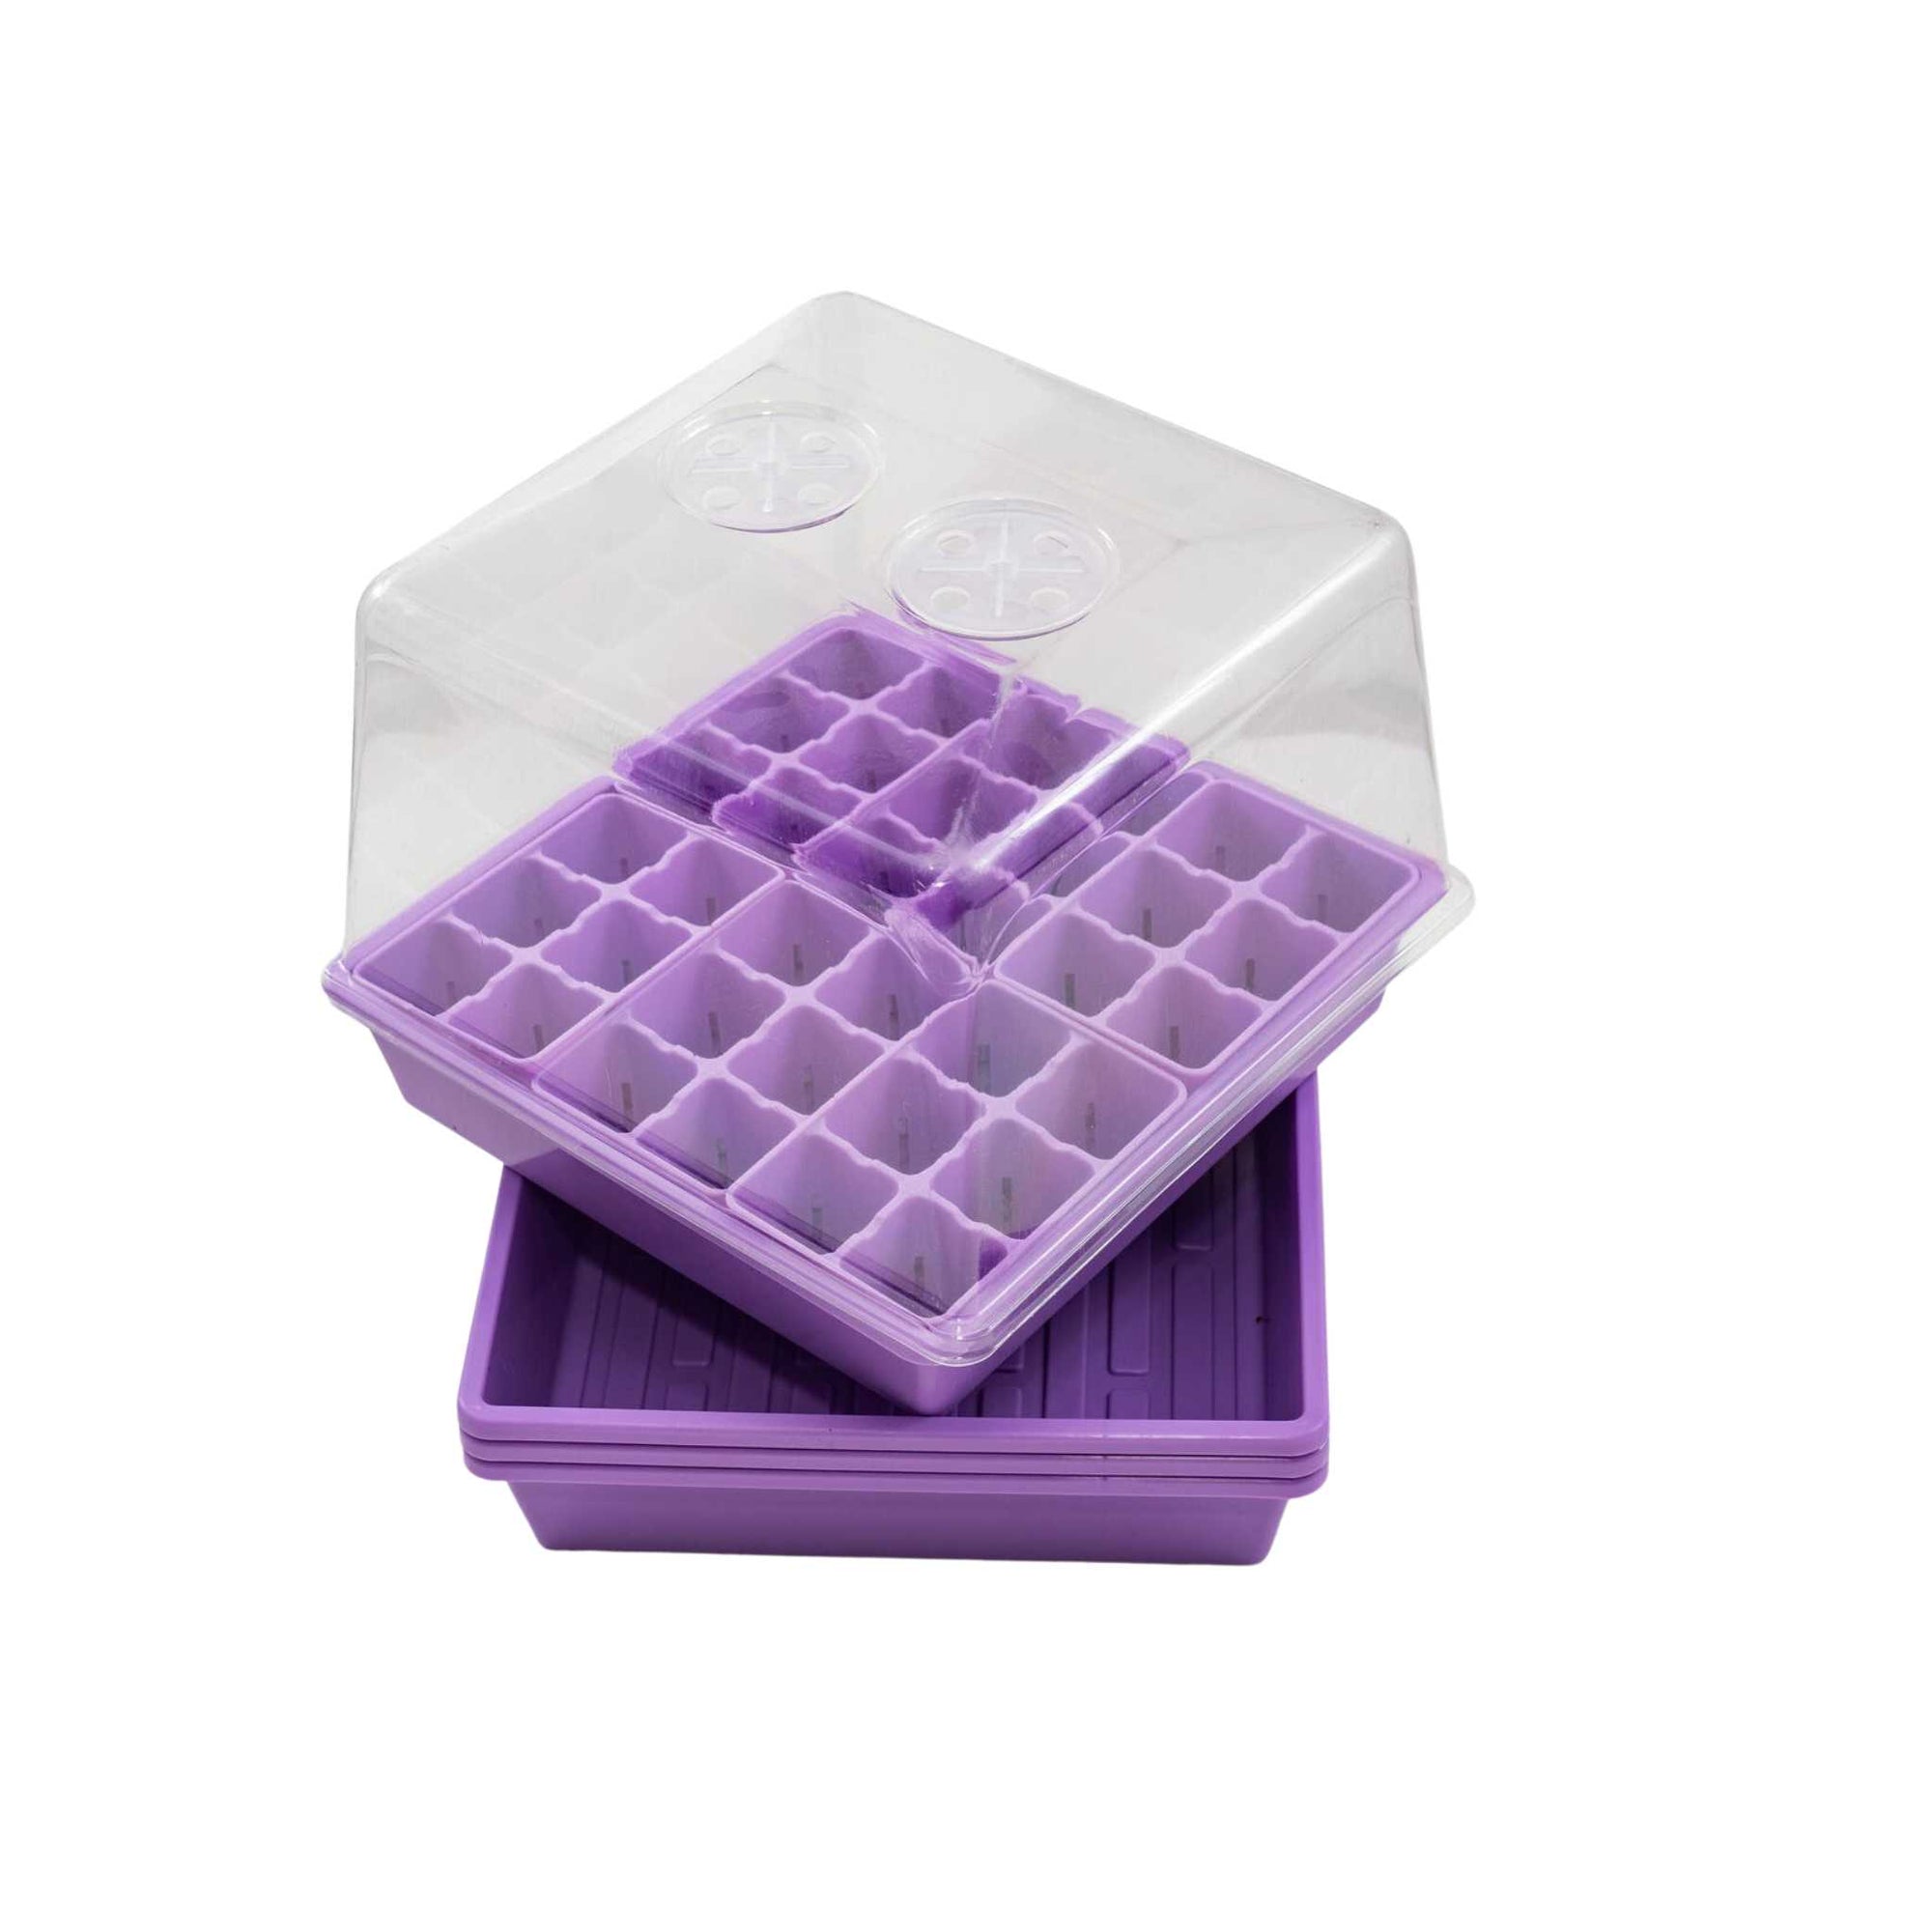 Purple 1010 Tray with No Holes with 6 six cell plug inserts and a clear dome stacked on top of 3 1010 deep trays with no holes in purple.